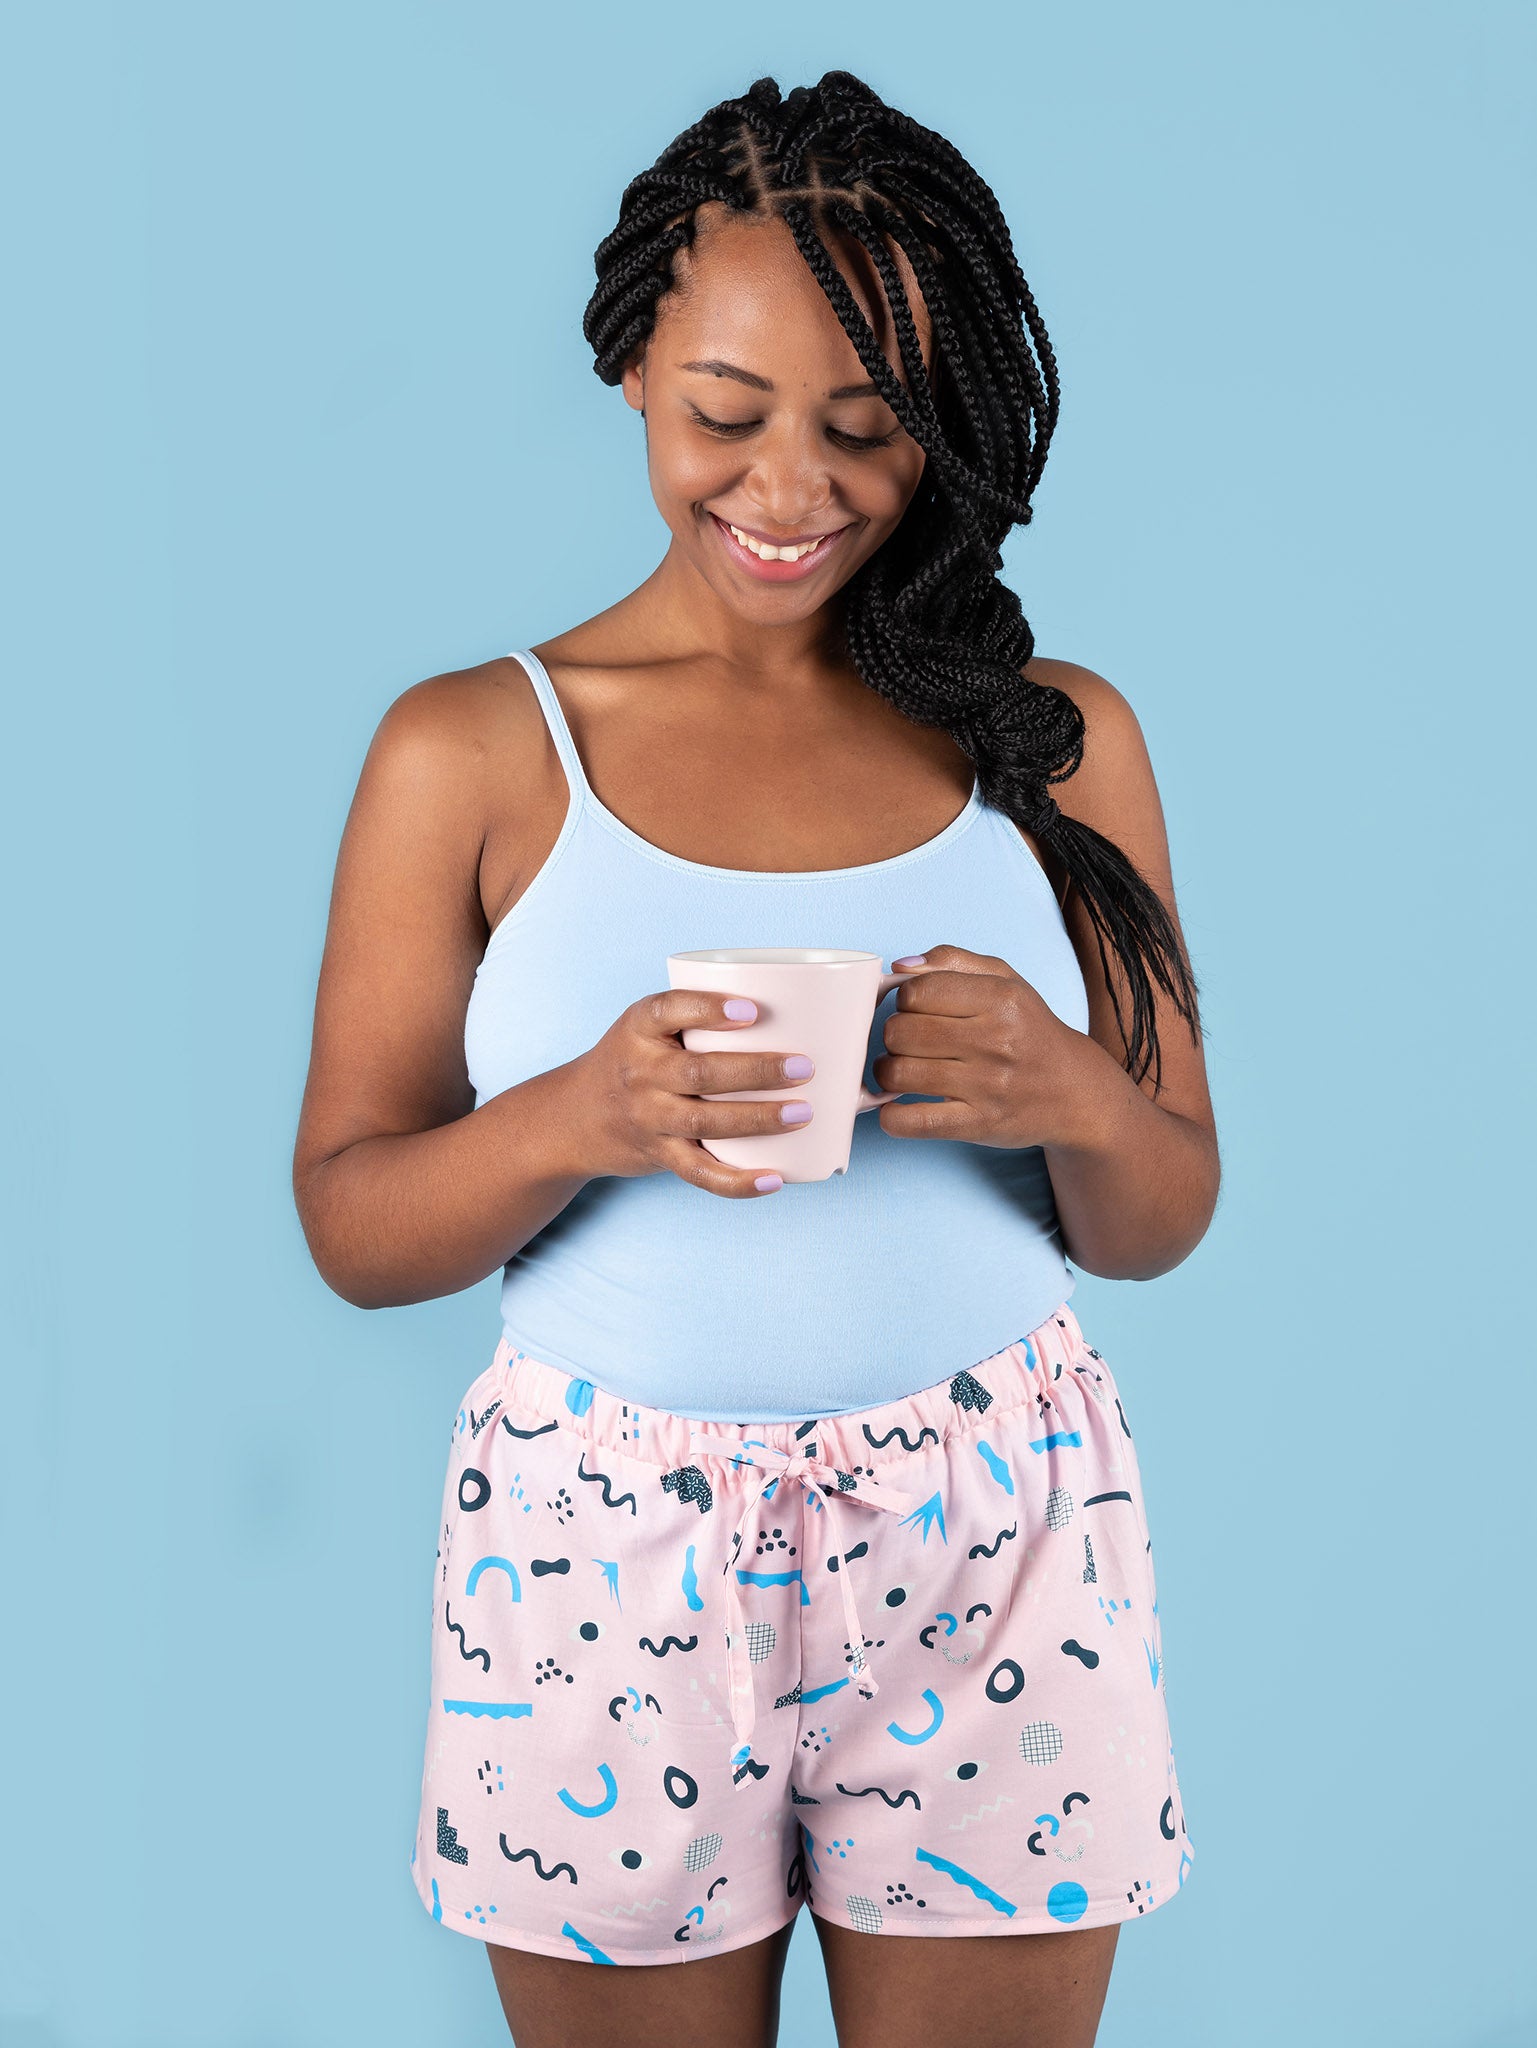 Tilly and the Buttons - Jaimie Pyjama Bottoms and Shorts Sewing Pattern